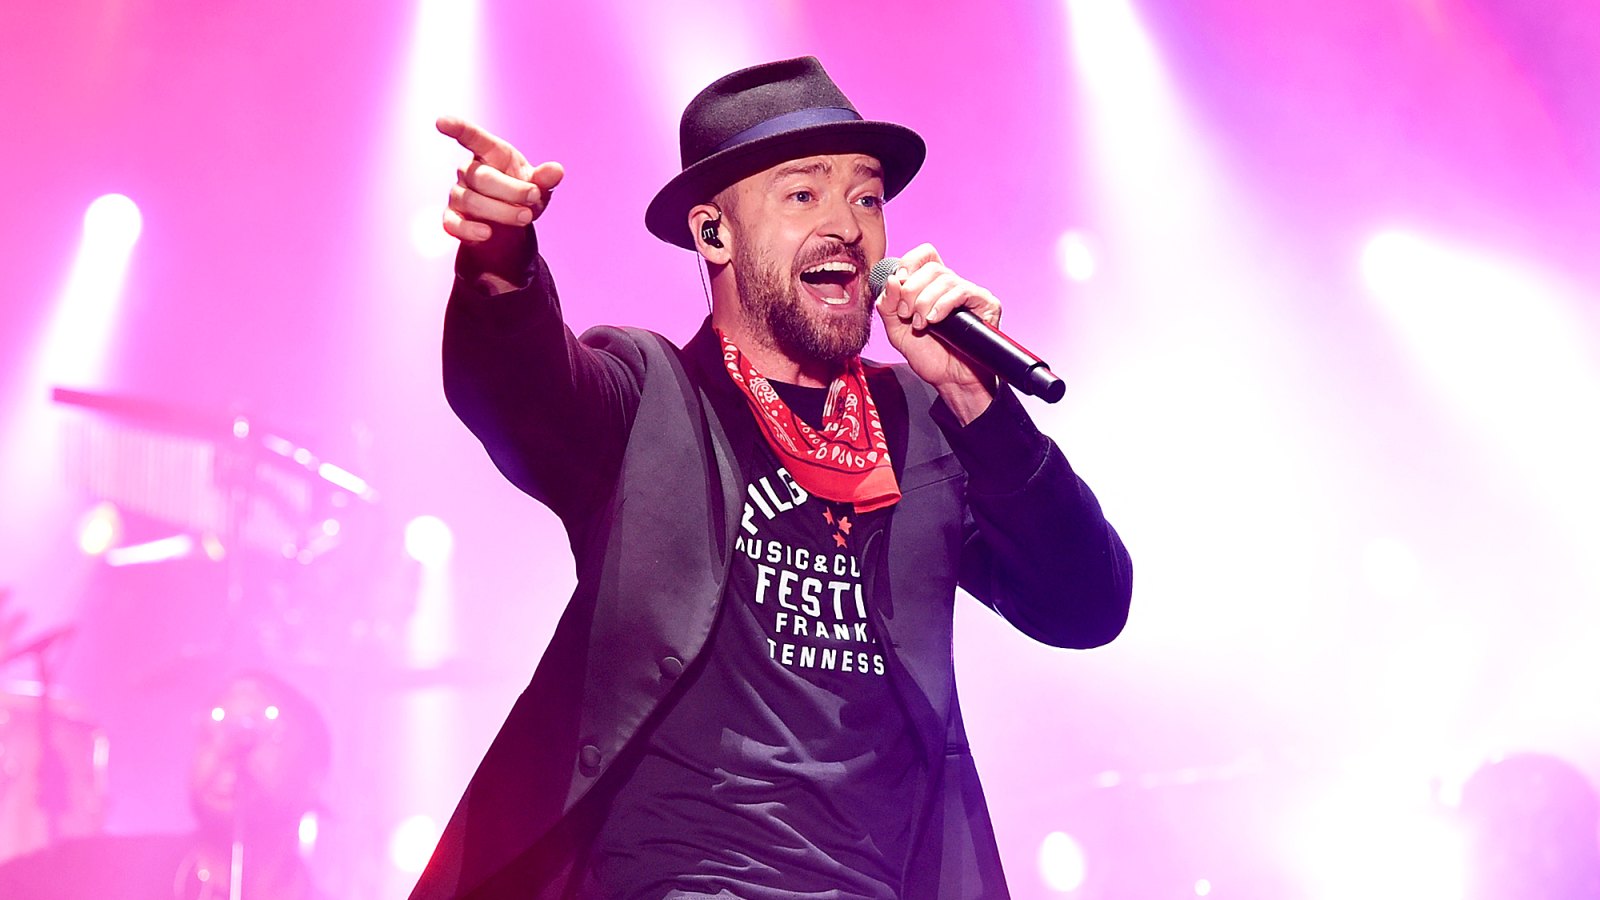 Justin Timberlake performs at the 2017 Pilgrimage Music & Cultural Festival in Franklin, Tennessee.